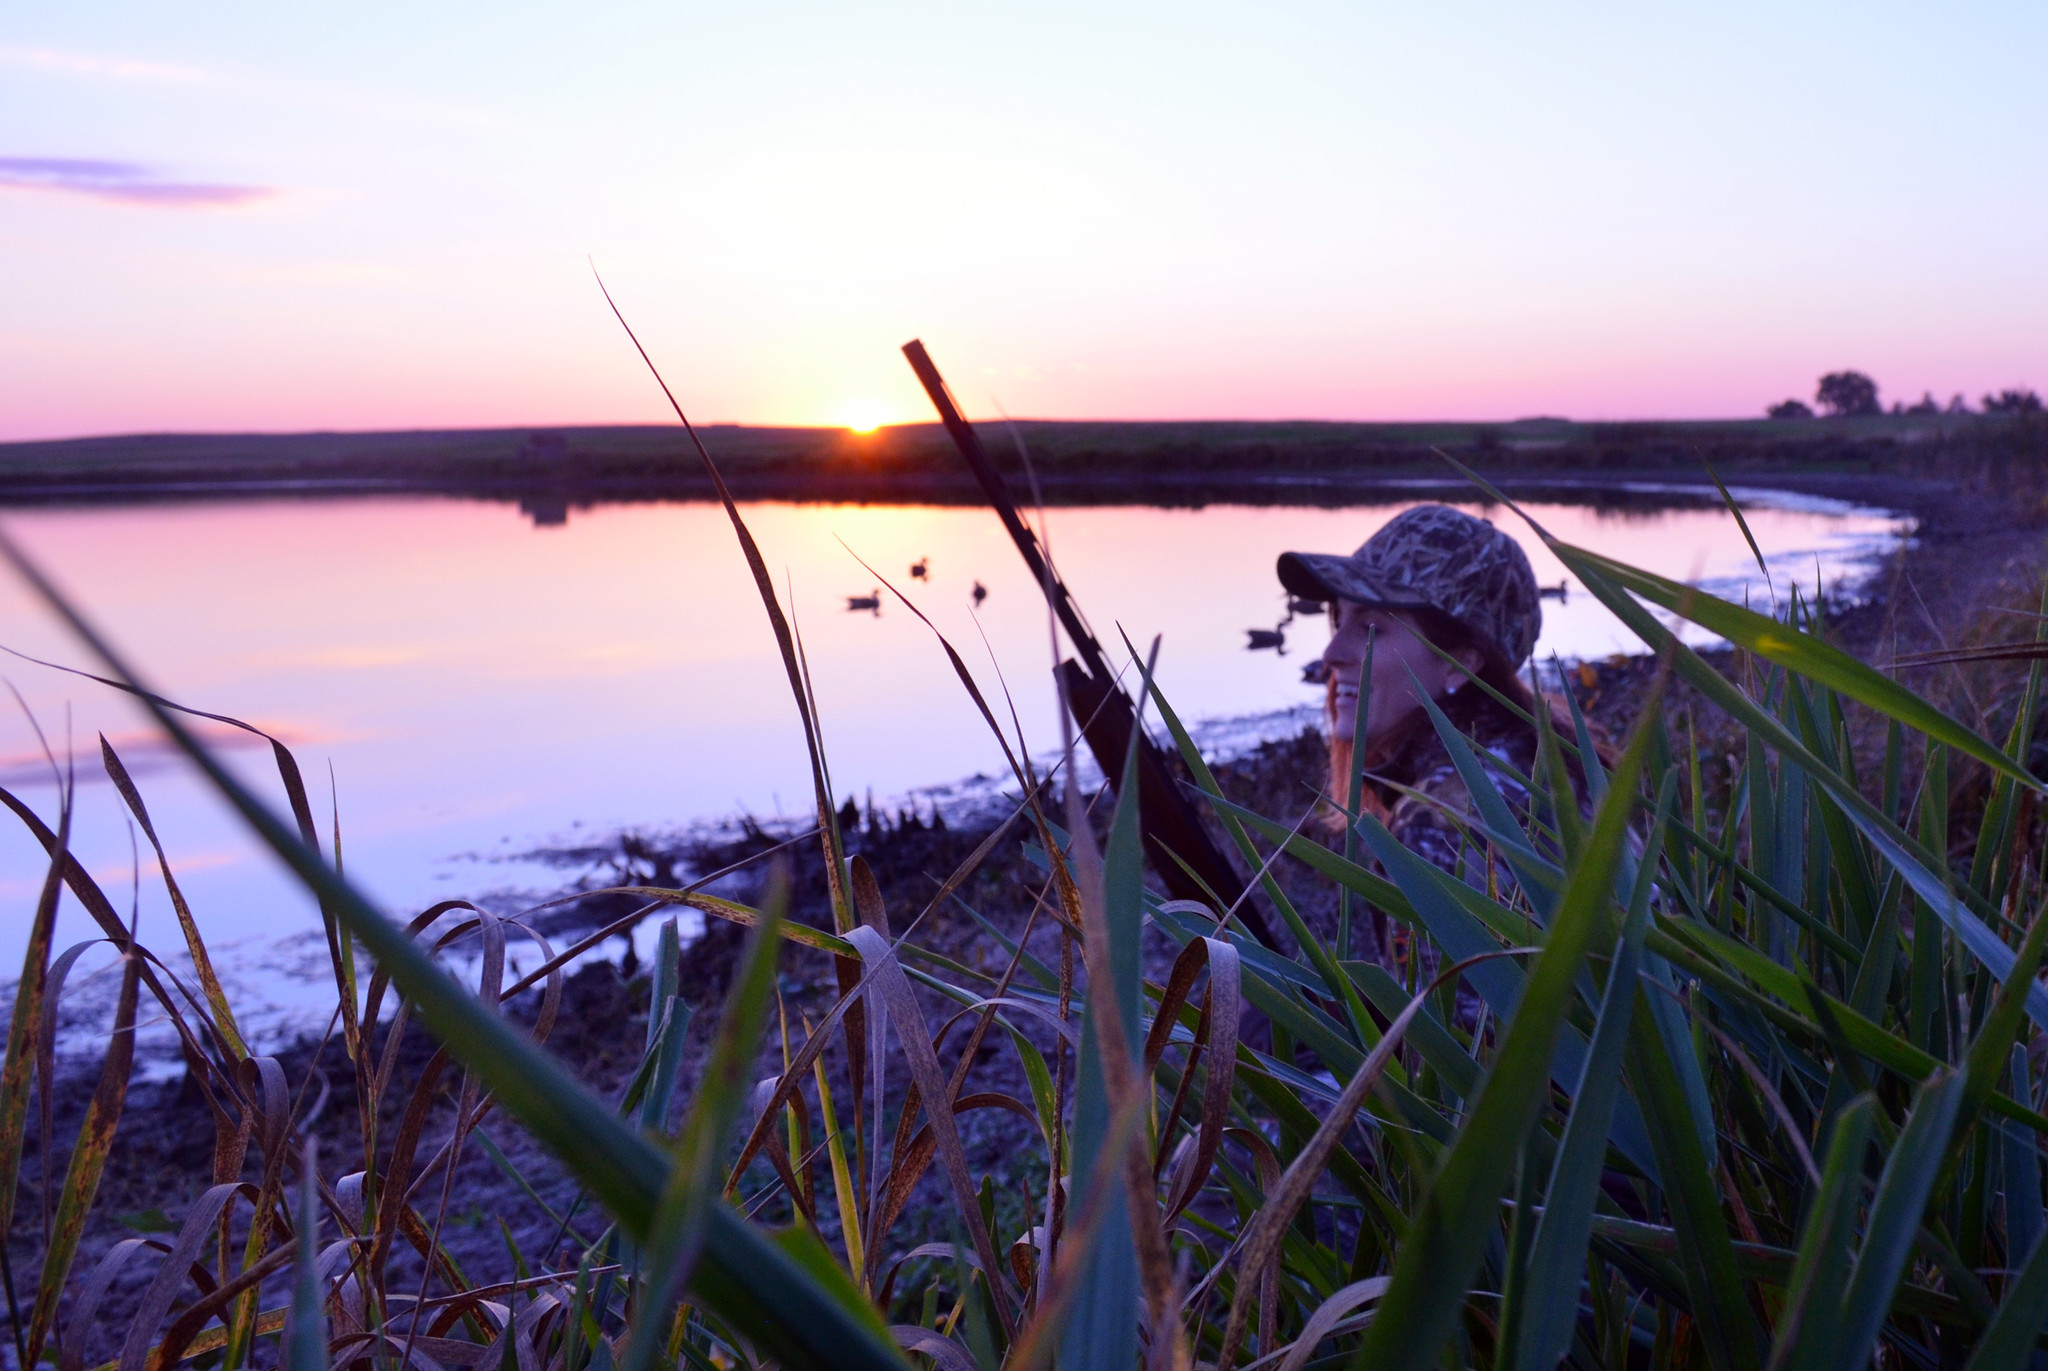 USFWS Will Expand Hunting and Fishing at 18 National Wildlife Refuges While Phasing Out Lead Ammo and Tackle There